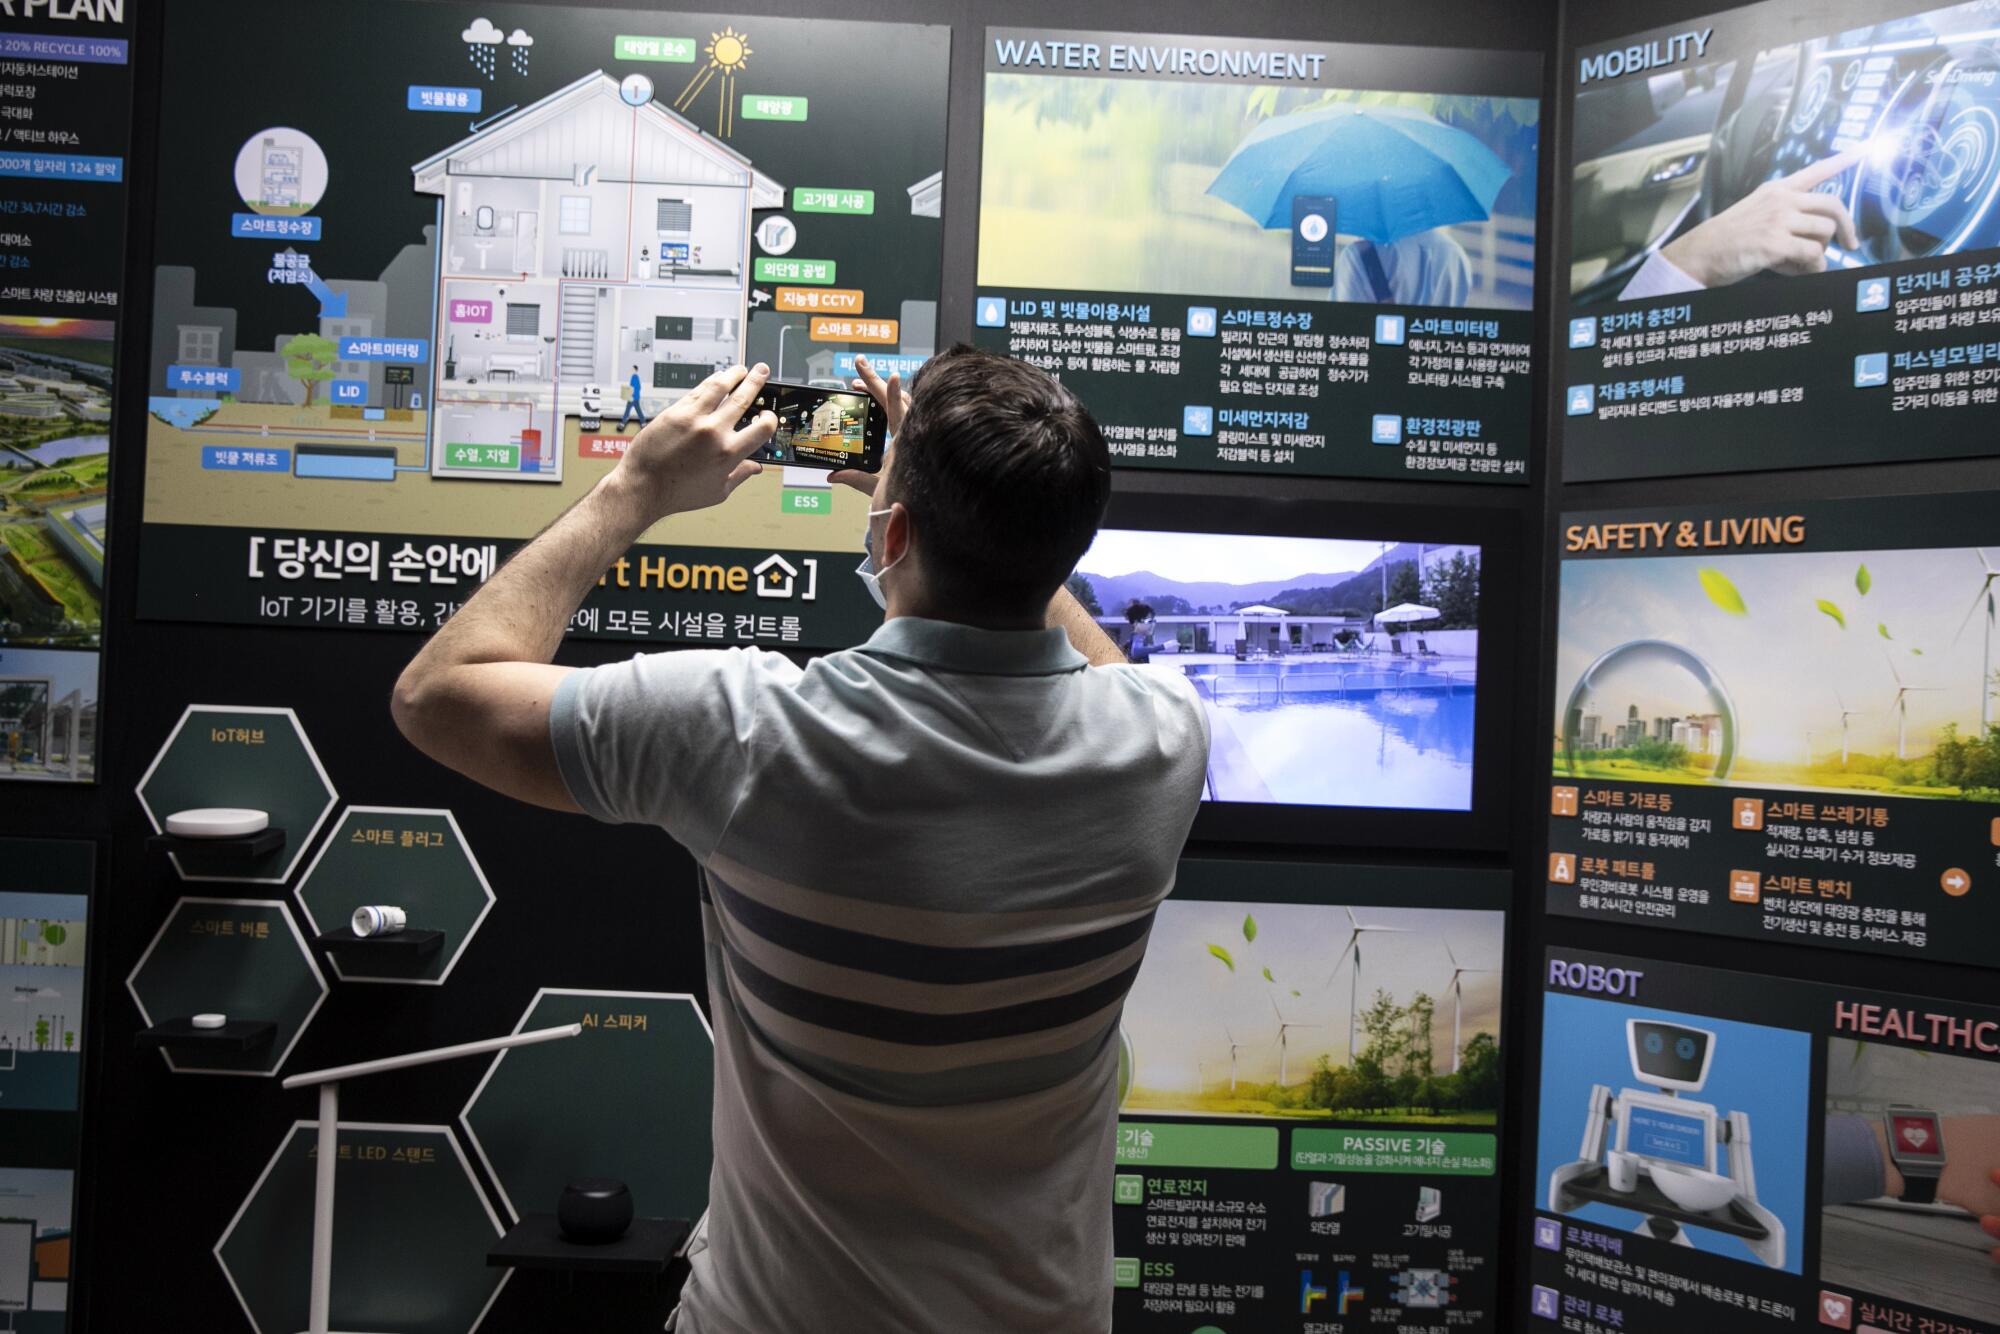 A man takes photos of panels illustrating a "smart home"  